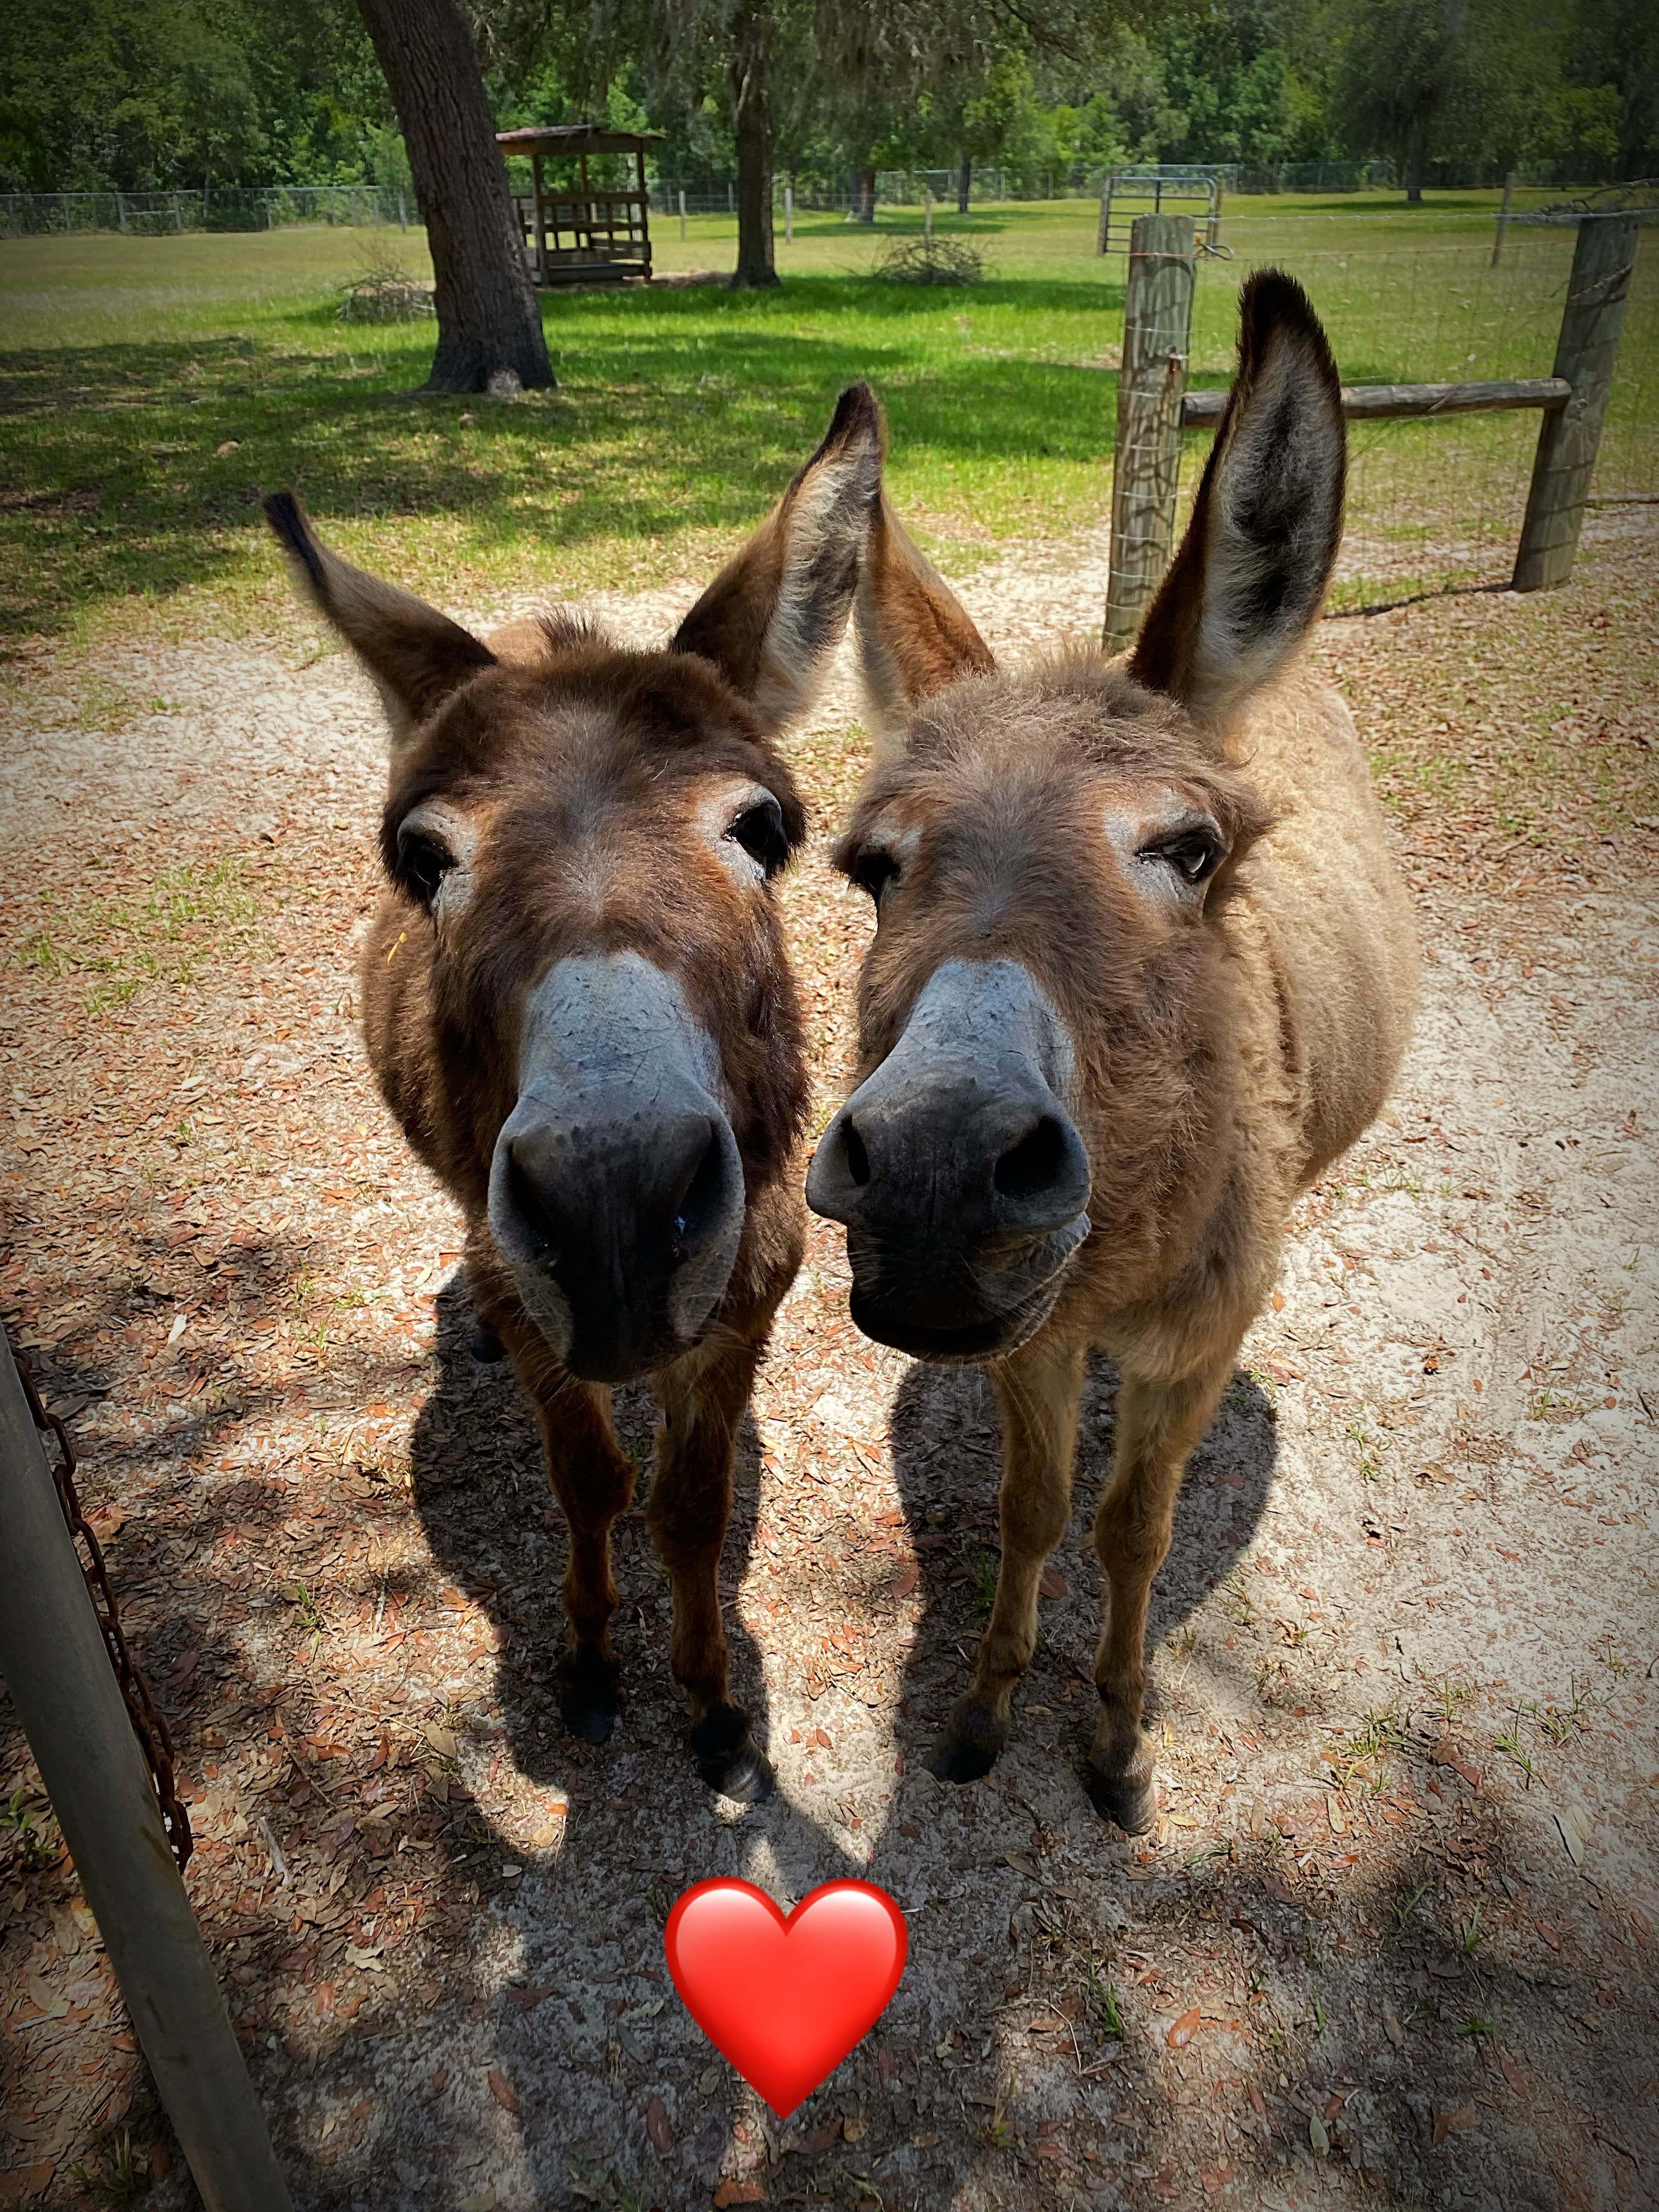 Fiona and Jane our miniature donkeys saying Hello